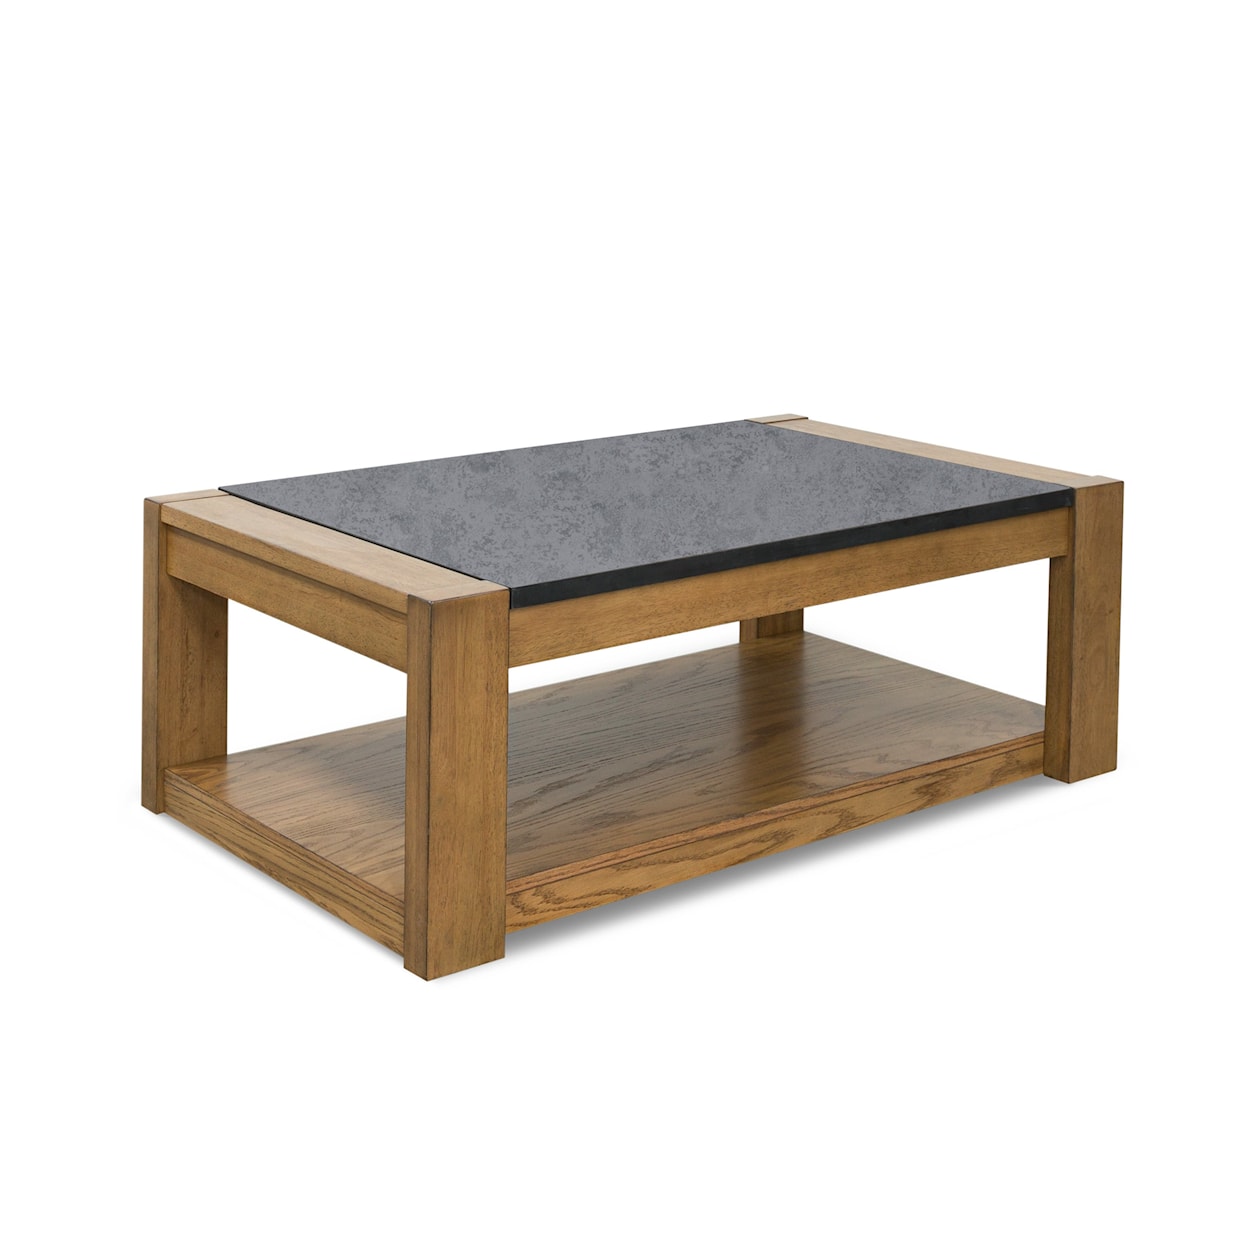 Benchcraft Quentina Lift Top Coffee Table